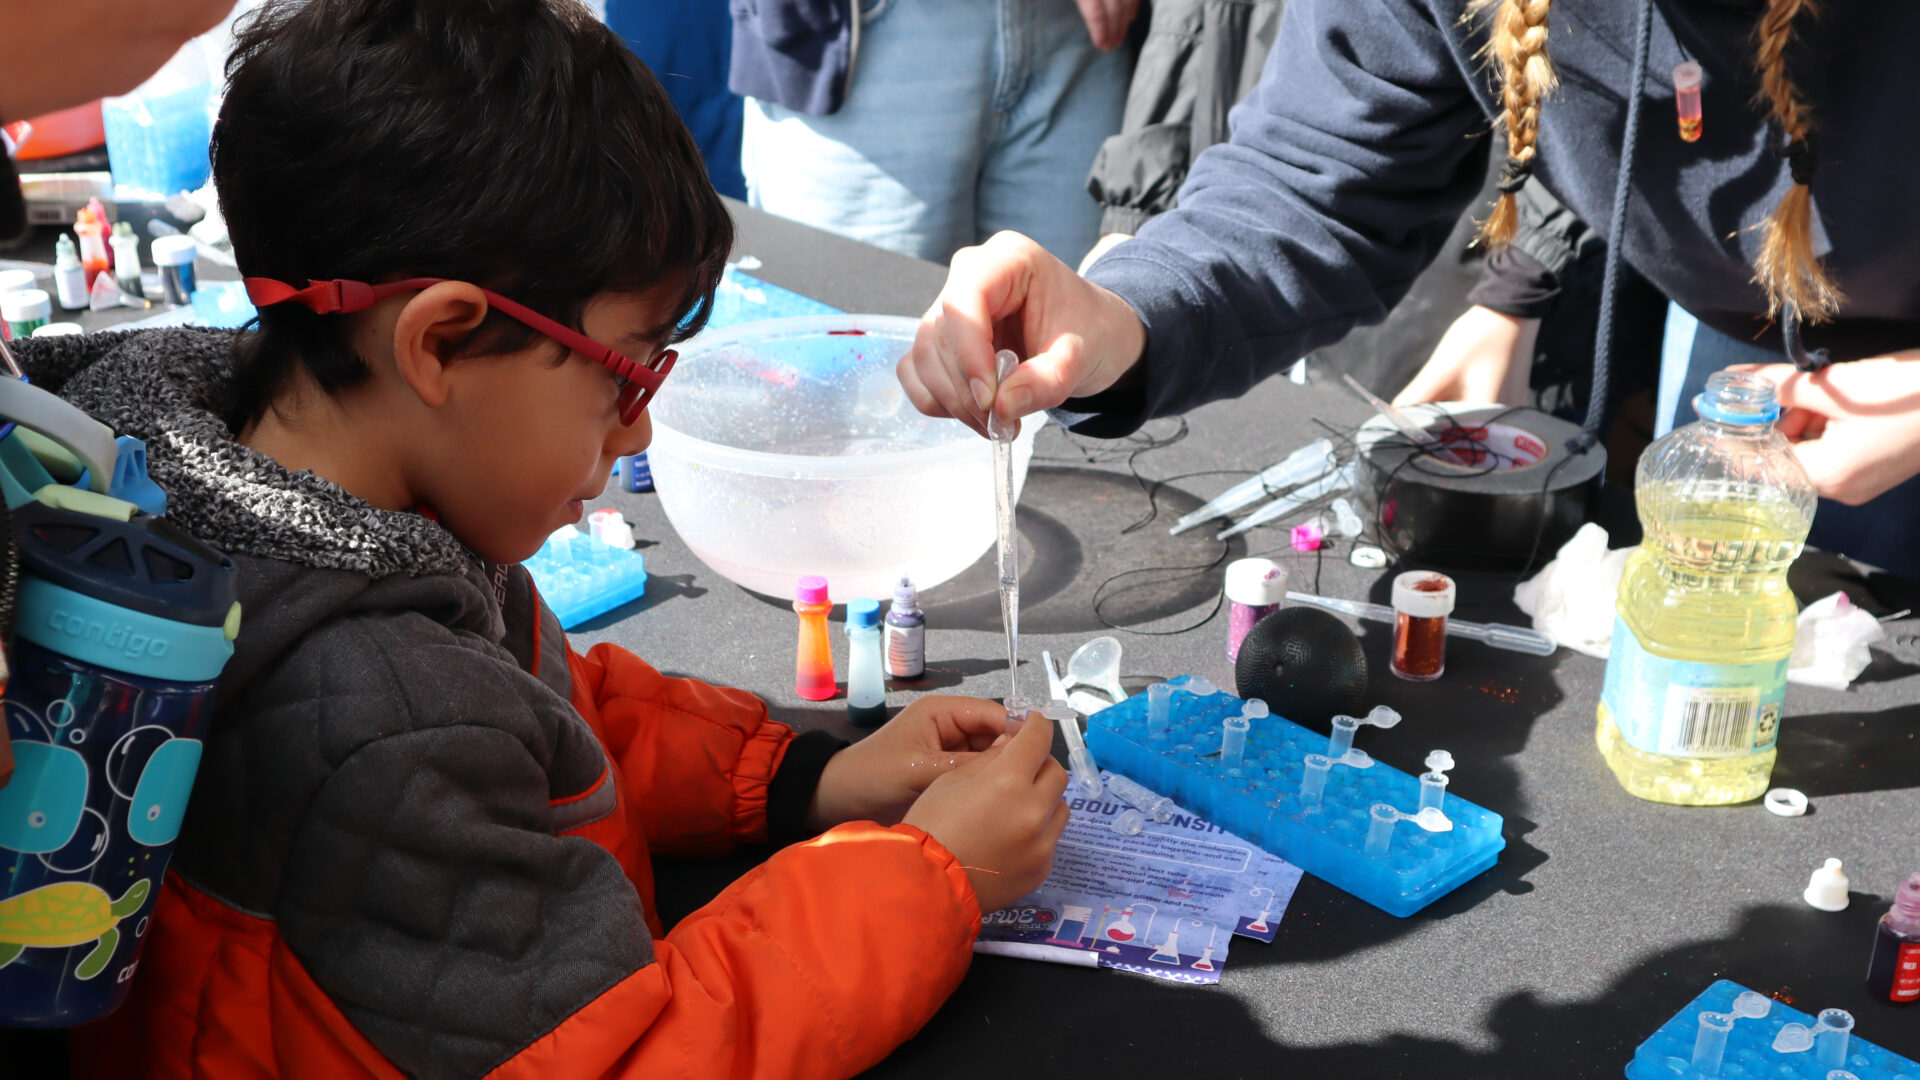 SDSU’s Society of Women Engineers facilitated a DIY mini lava lamp necklace activity to teach about liquid density